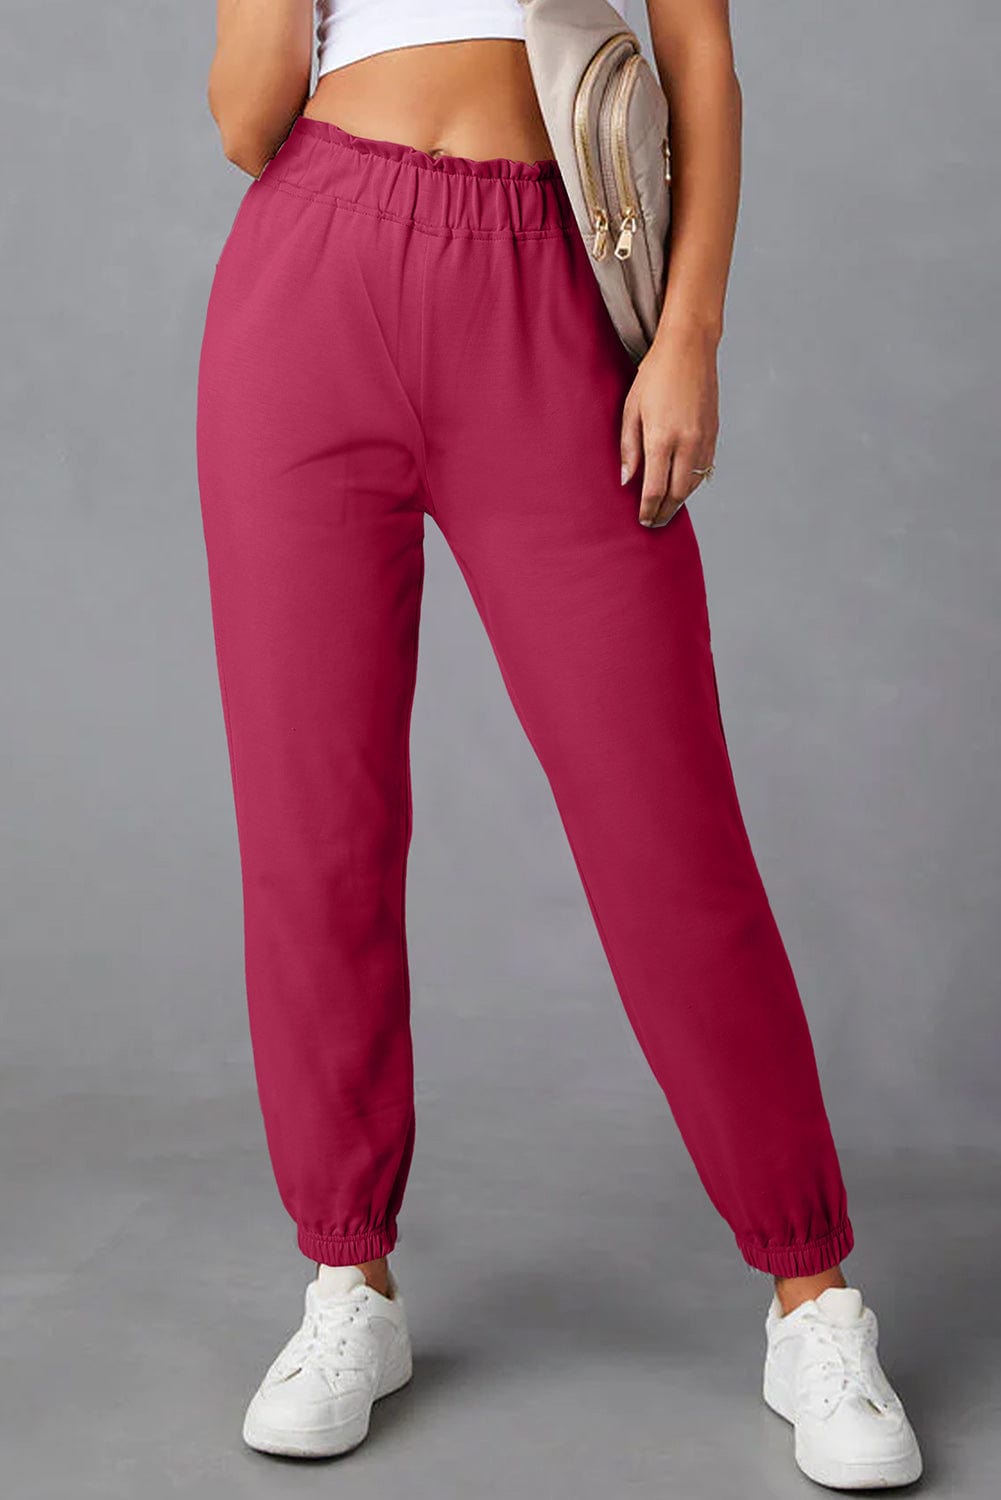 The802Gypsy bottoms/sweatpants Hot Pink / S GYPSY-Elastic Waist Joggers